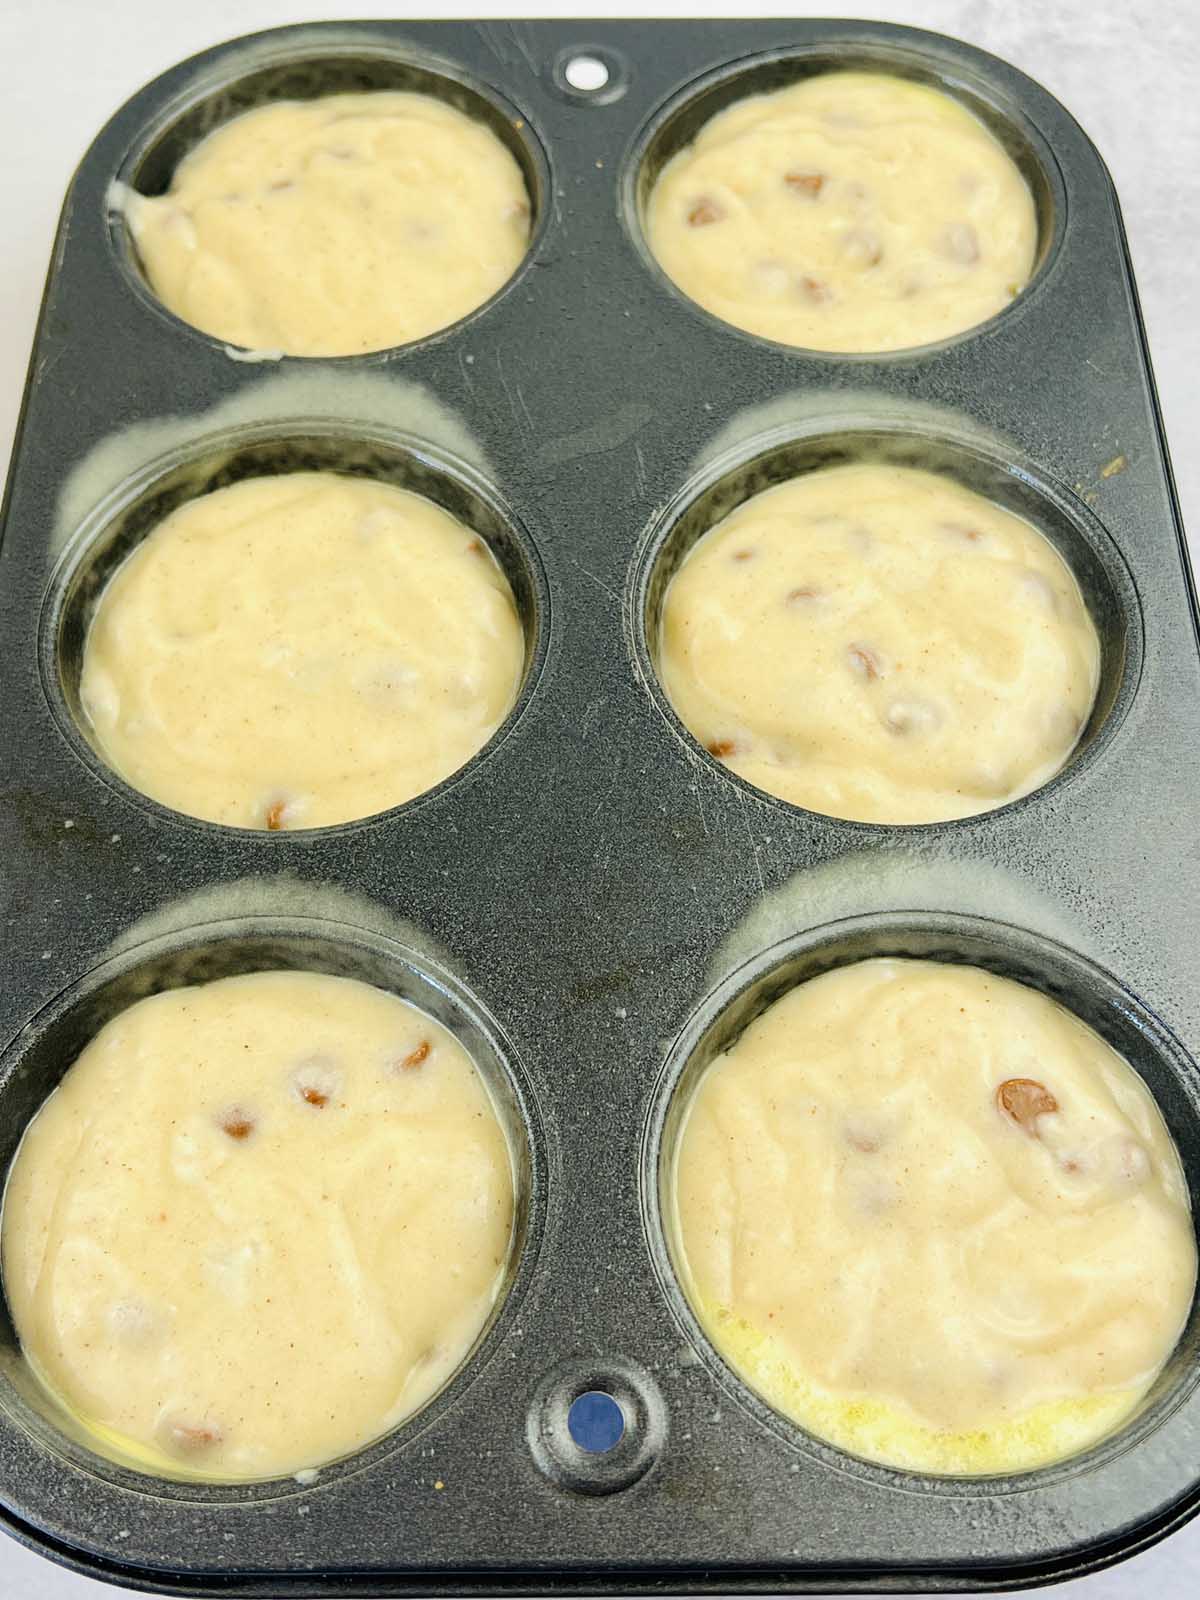 Batter in the muffin tin.